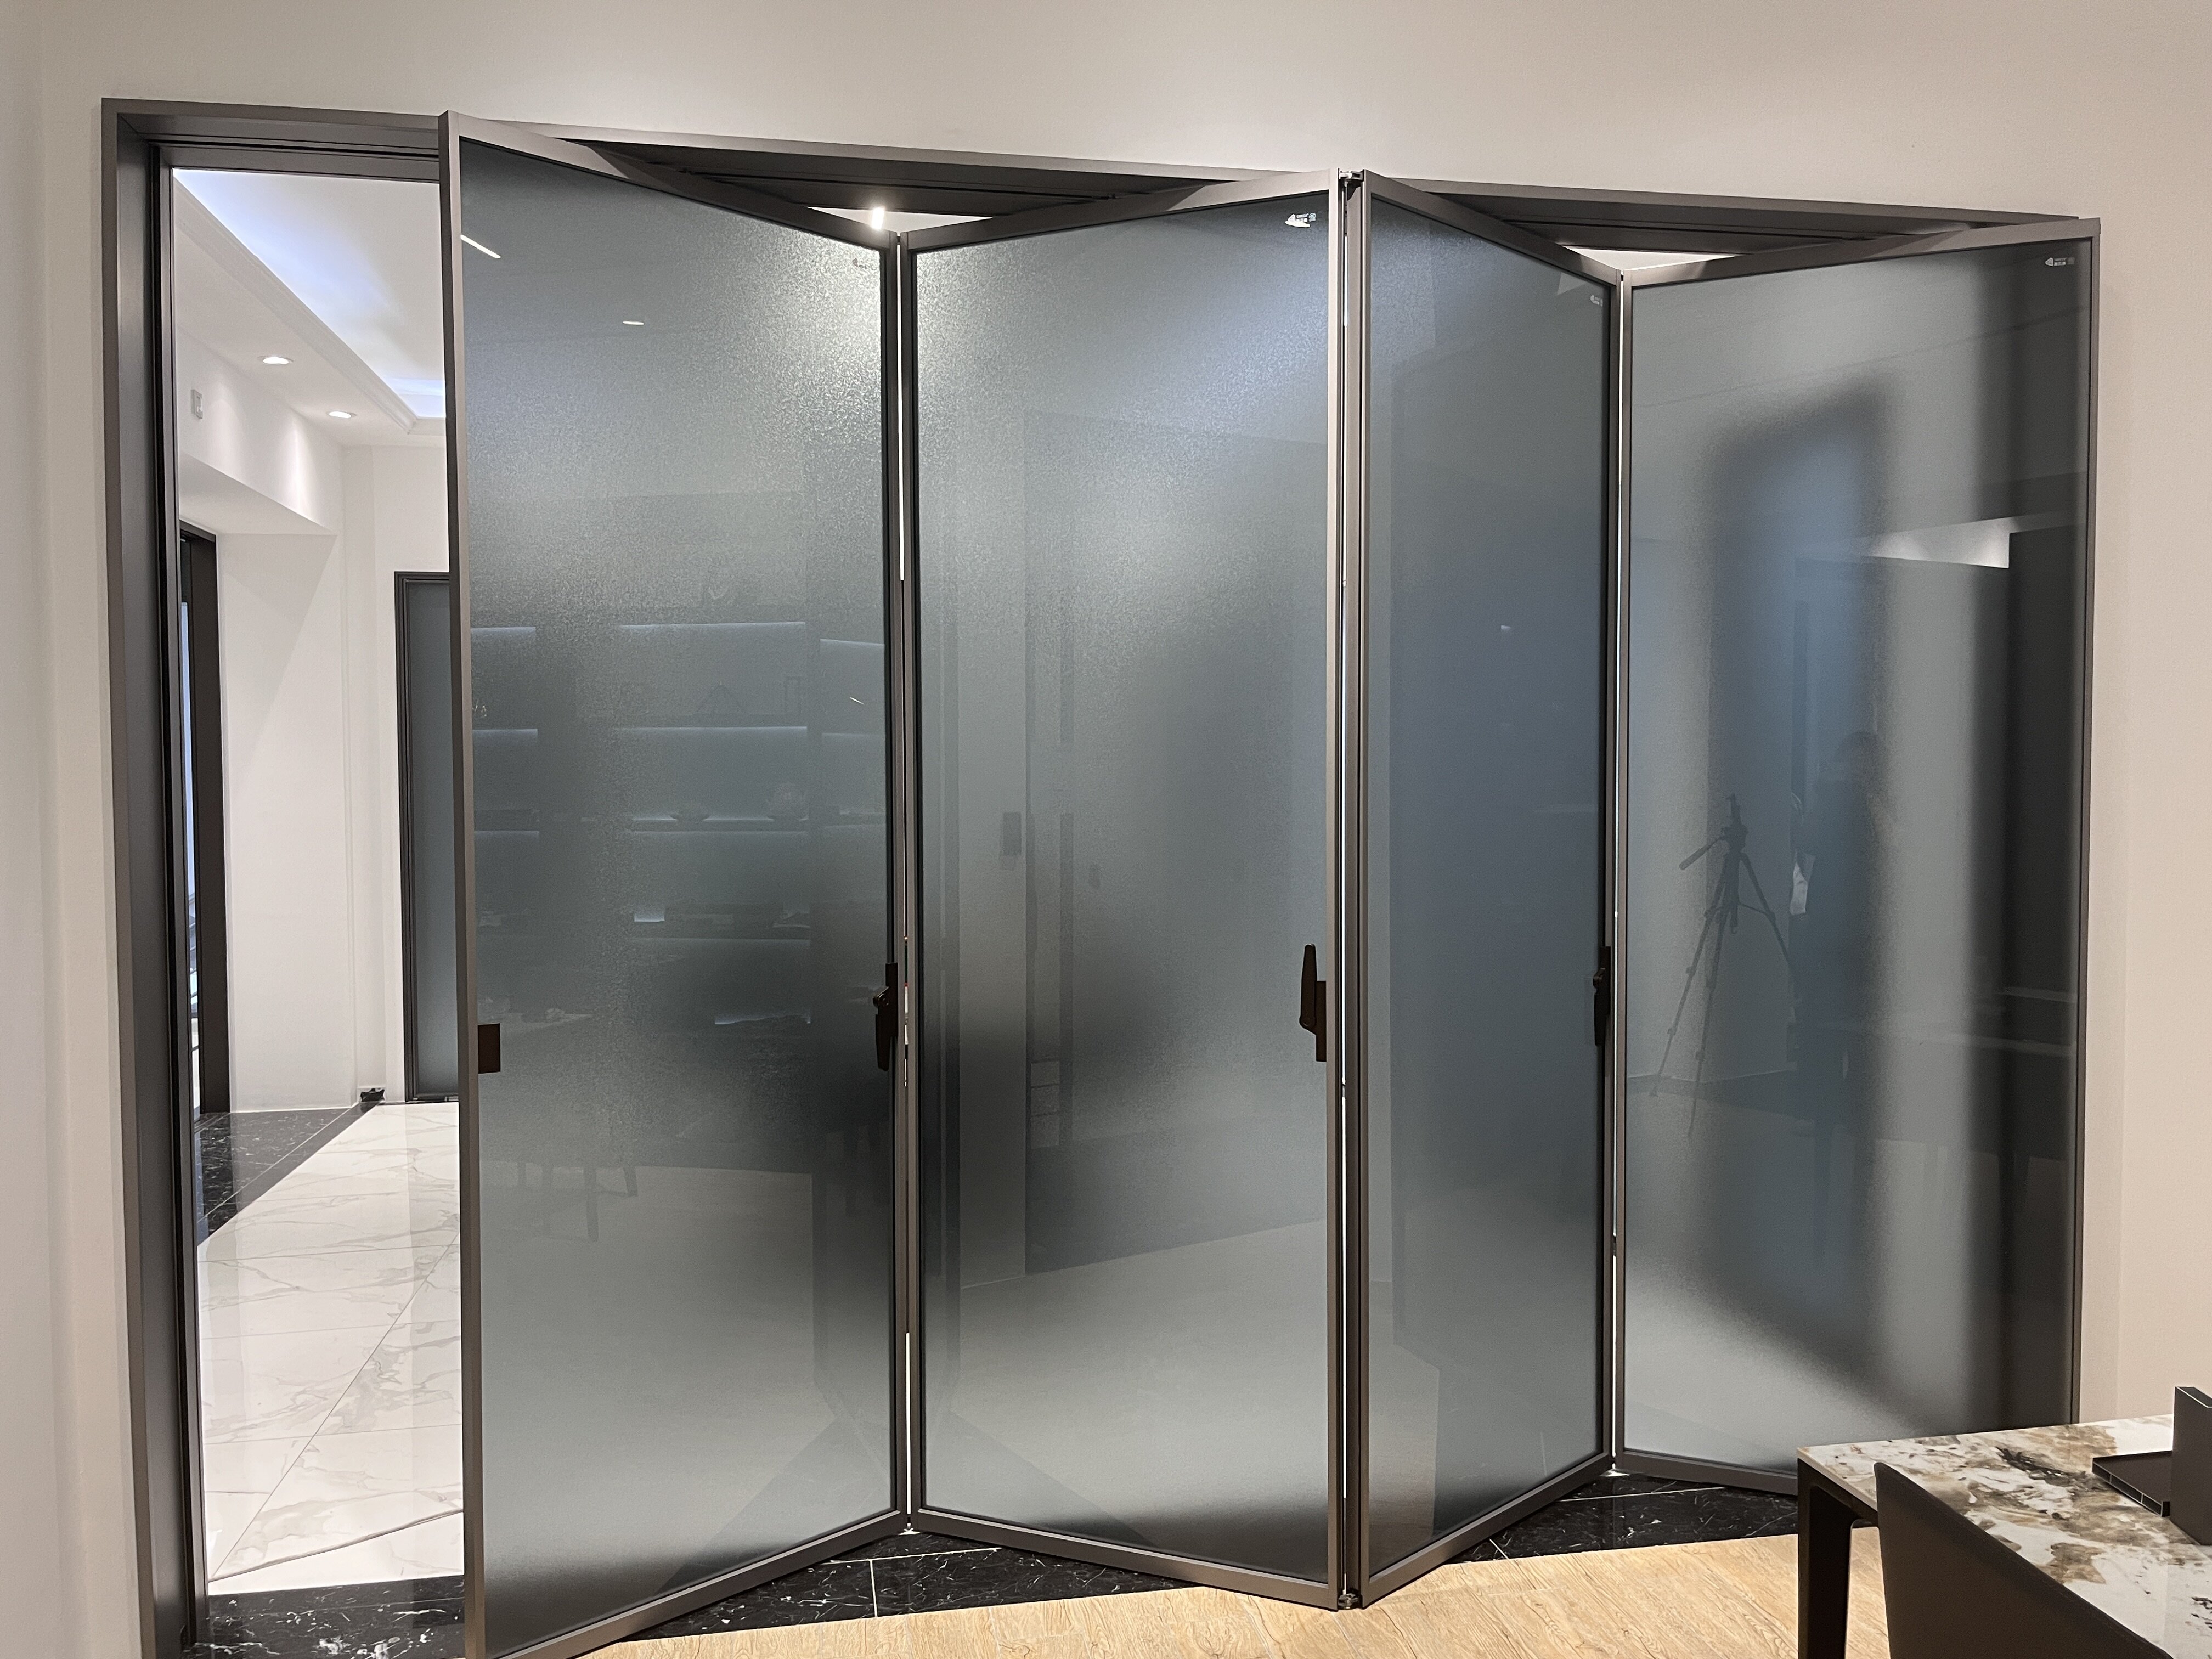 Perfect System Folding Door Application uses an aluminum profile combination